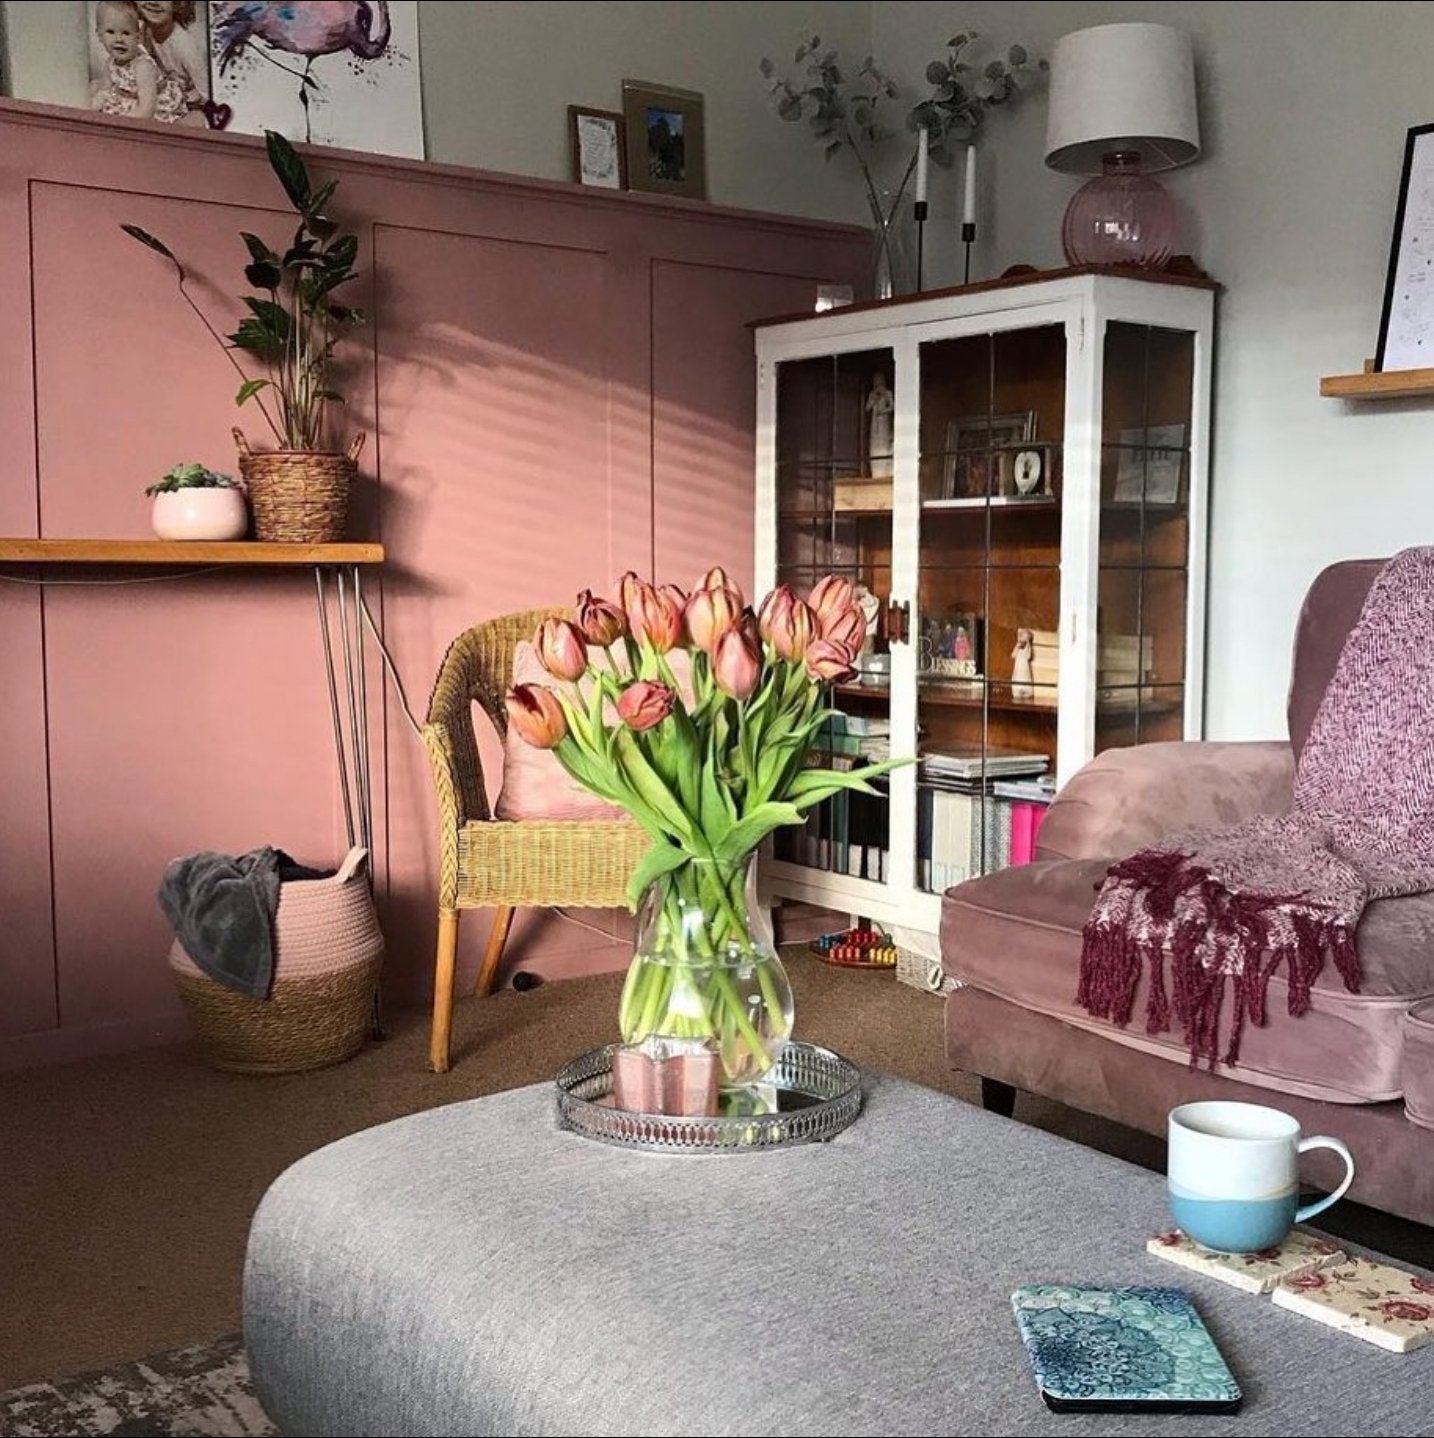 How To Decorate Your Home To Support Mental Wellbeing - The Hairpin Leg Co.